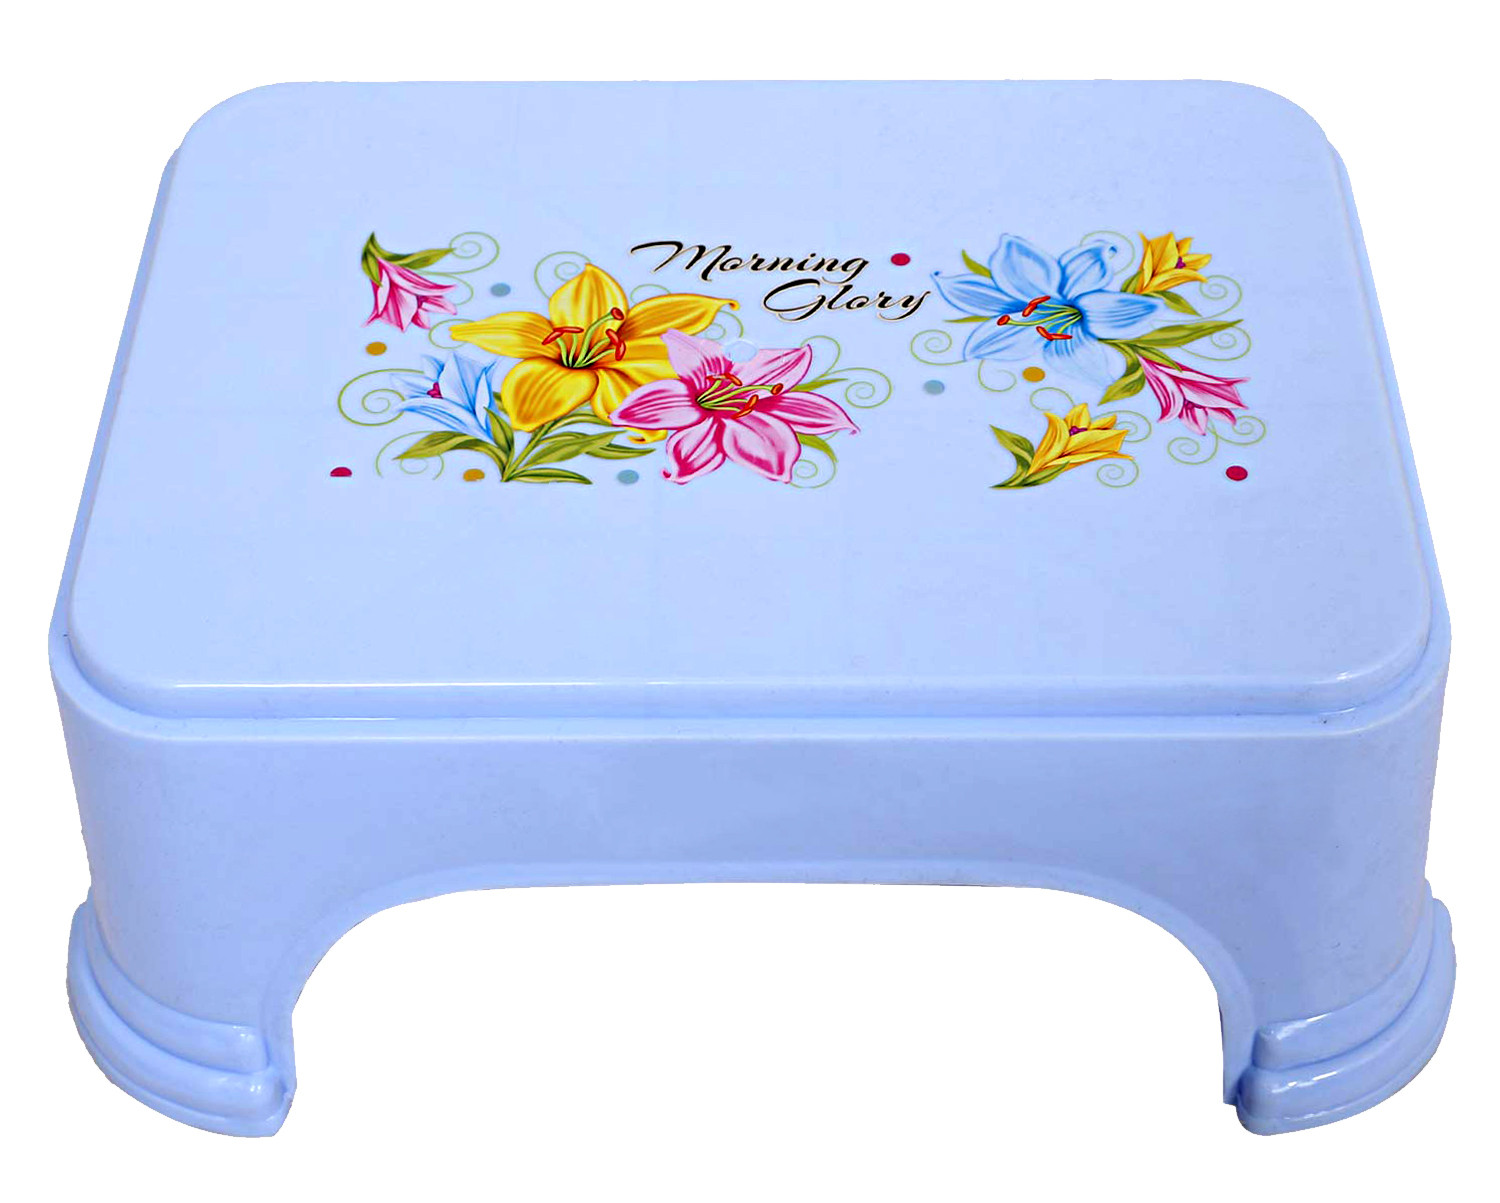 Kuber Industries Floral Print 2 Pieces Plastic Bathroom Stool, Adults Simple Style Stool Anti-Slip with Strong Bearing Stool for Home, Office, Kindergarten, Blue & White